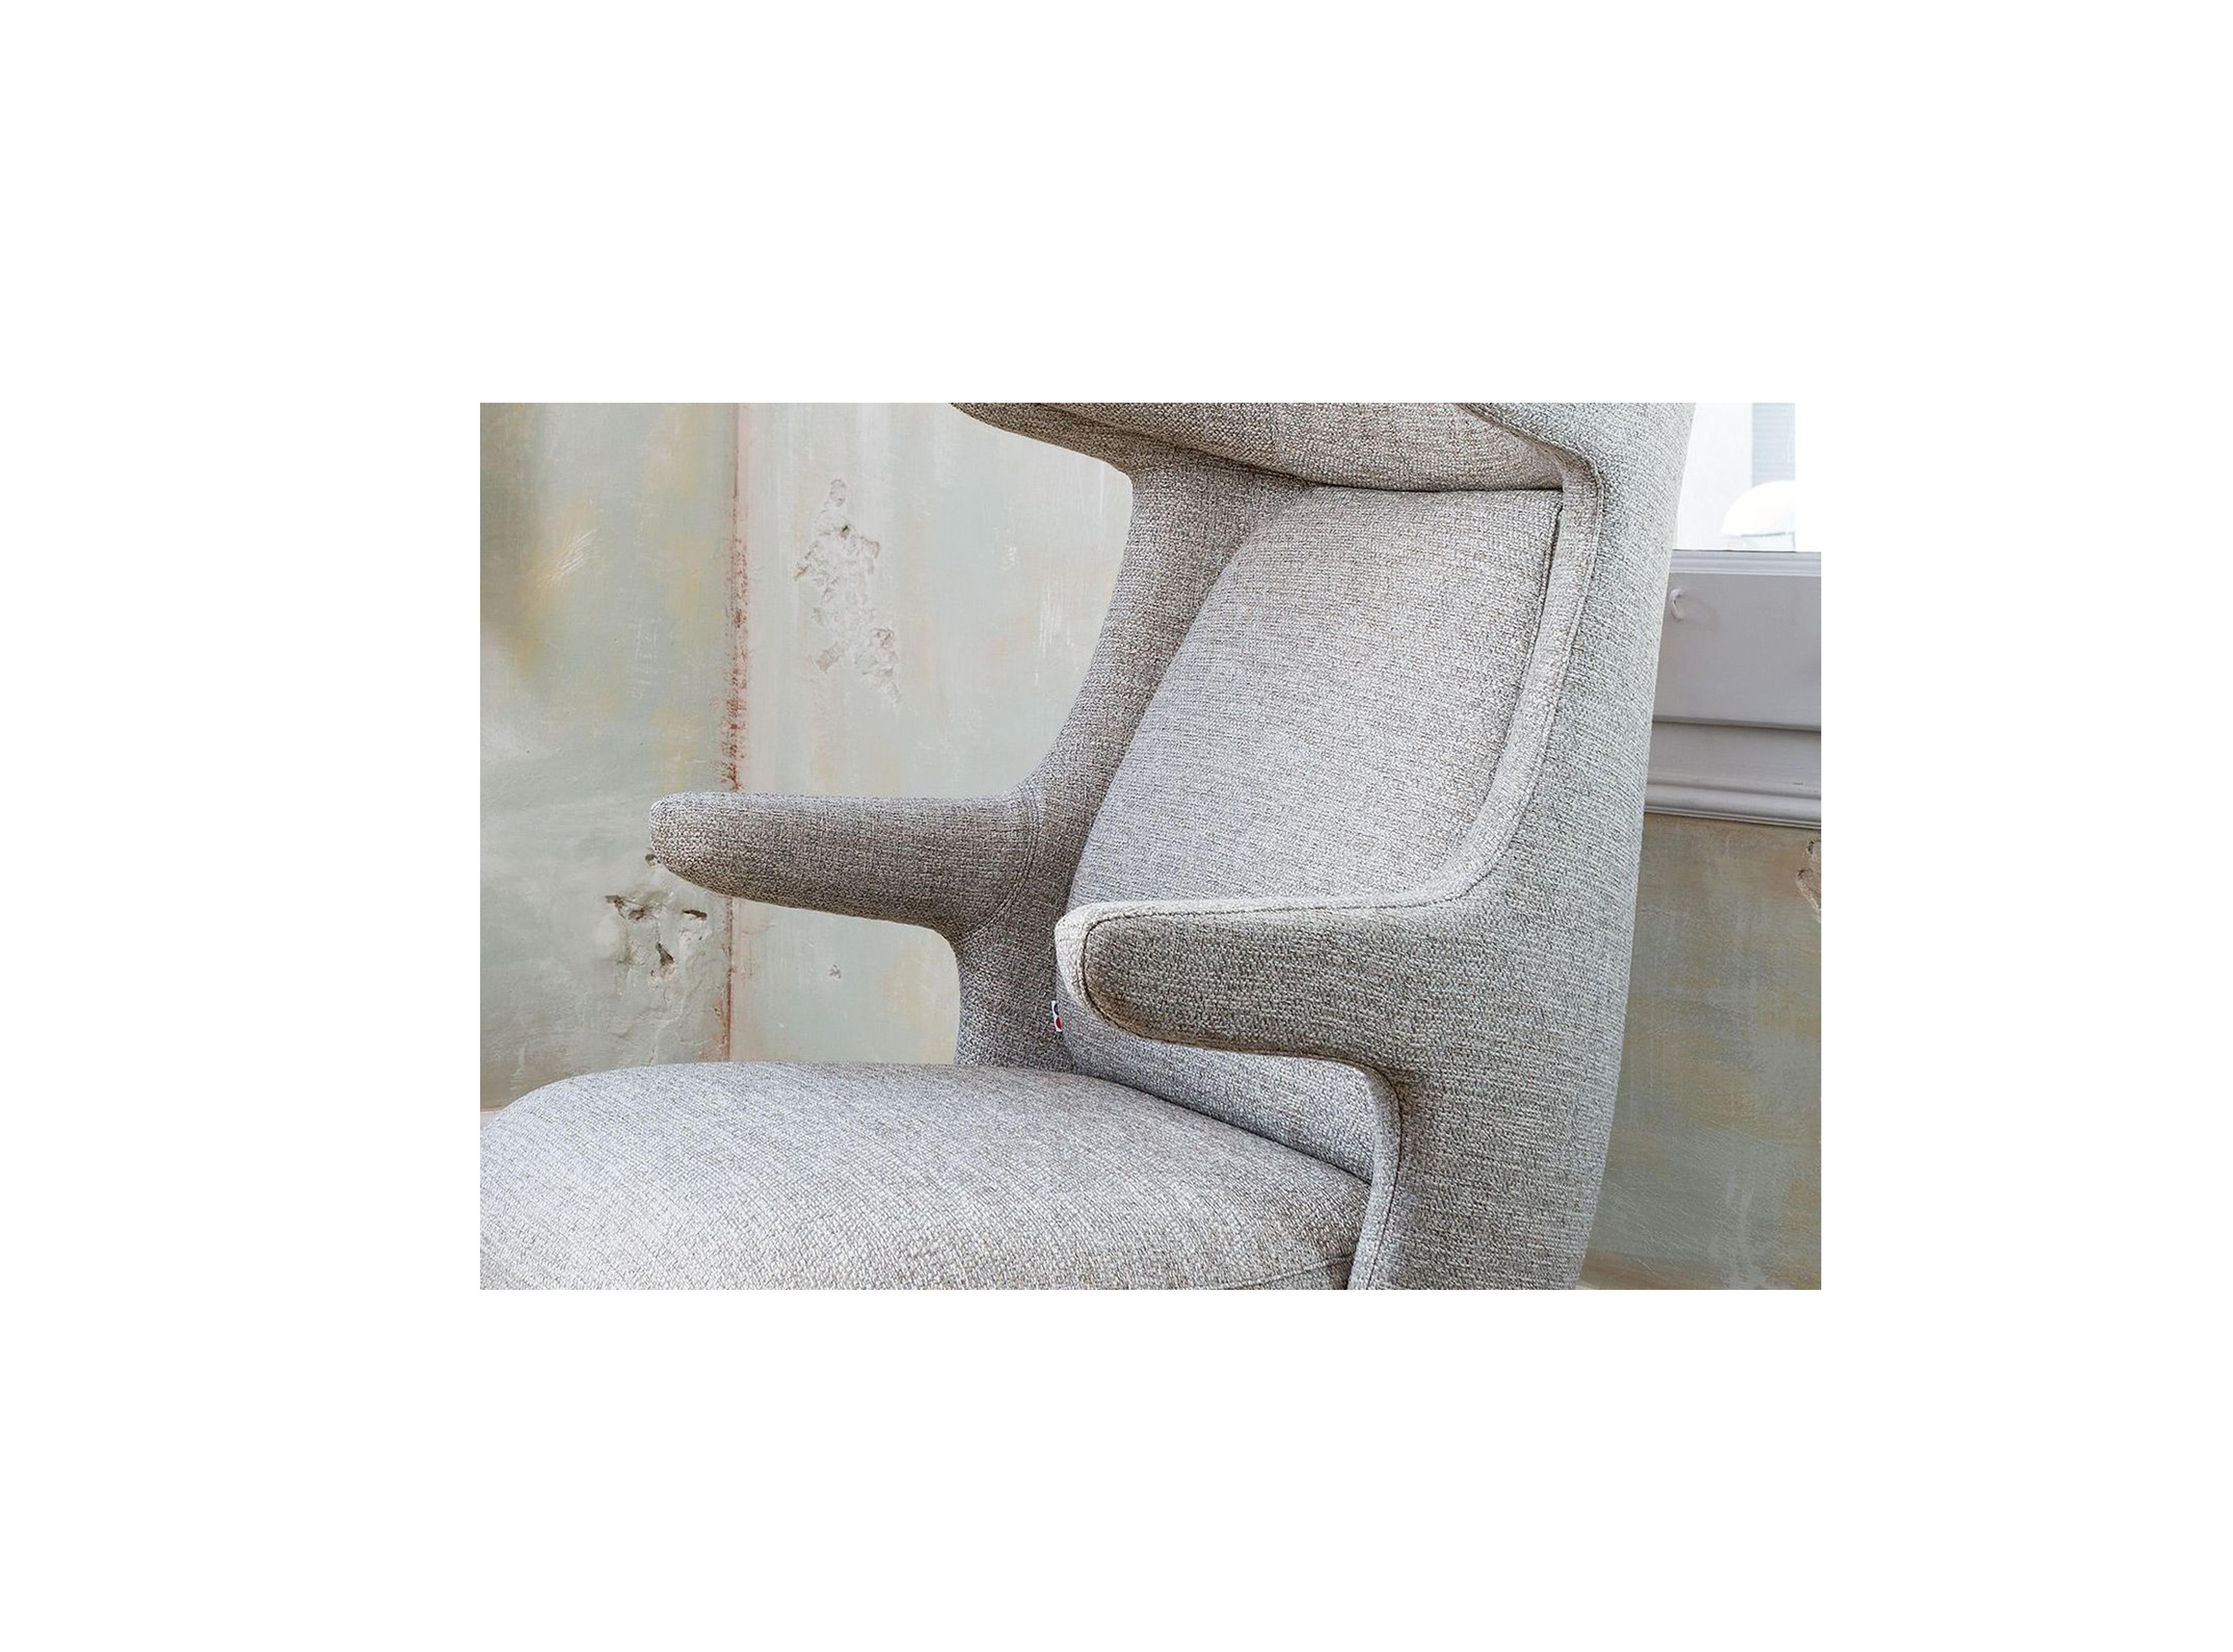 Jaime Hayon, Contemporary, Monocolor in Gray Fabric Upholstery Dino Armchair In New Condition For Sale In Barcelona, Barcelona